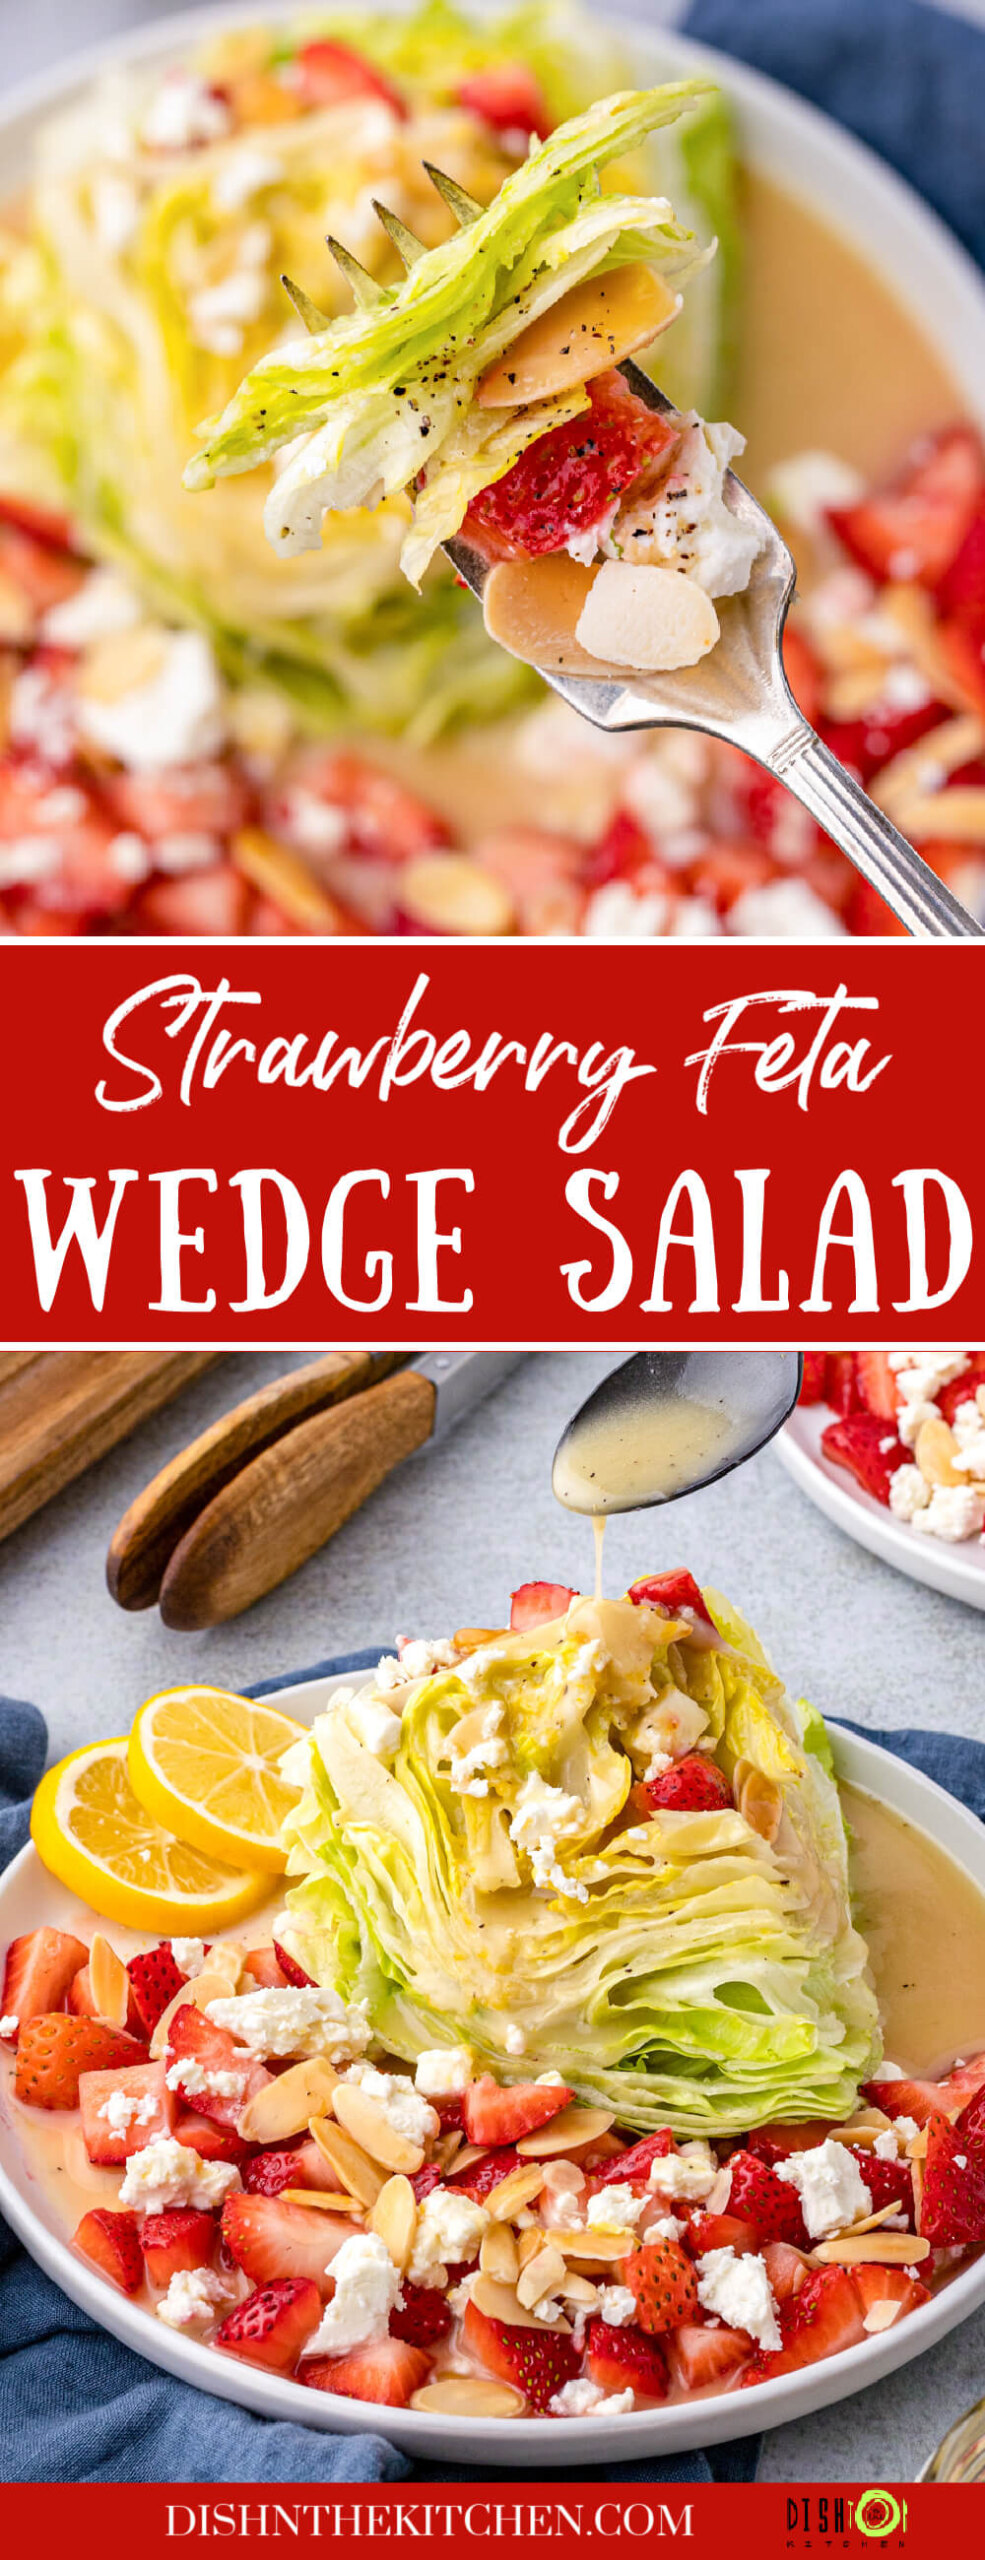 Pinterest image of a plated wedge salad topped with strawberries, feta, and lemon vinaigrette.